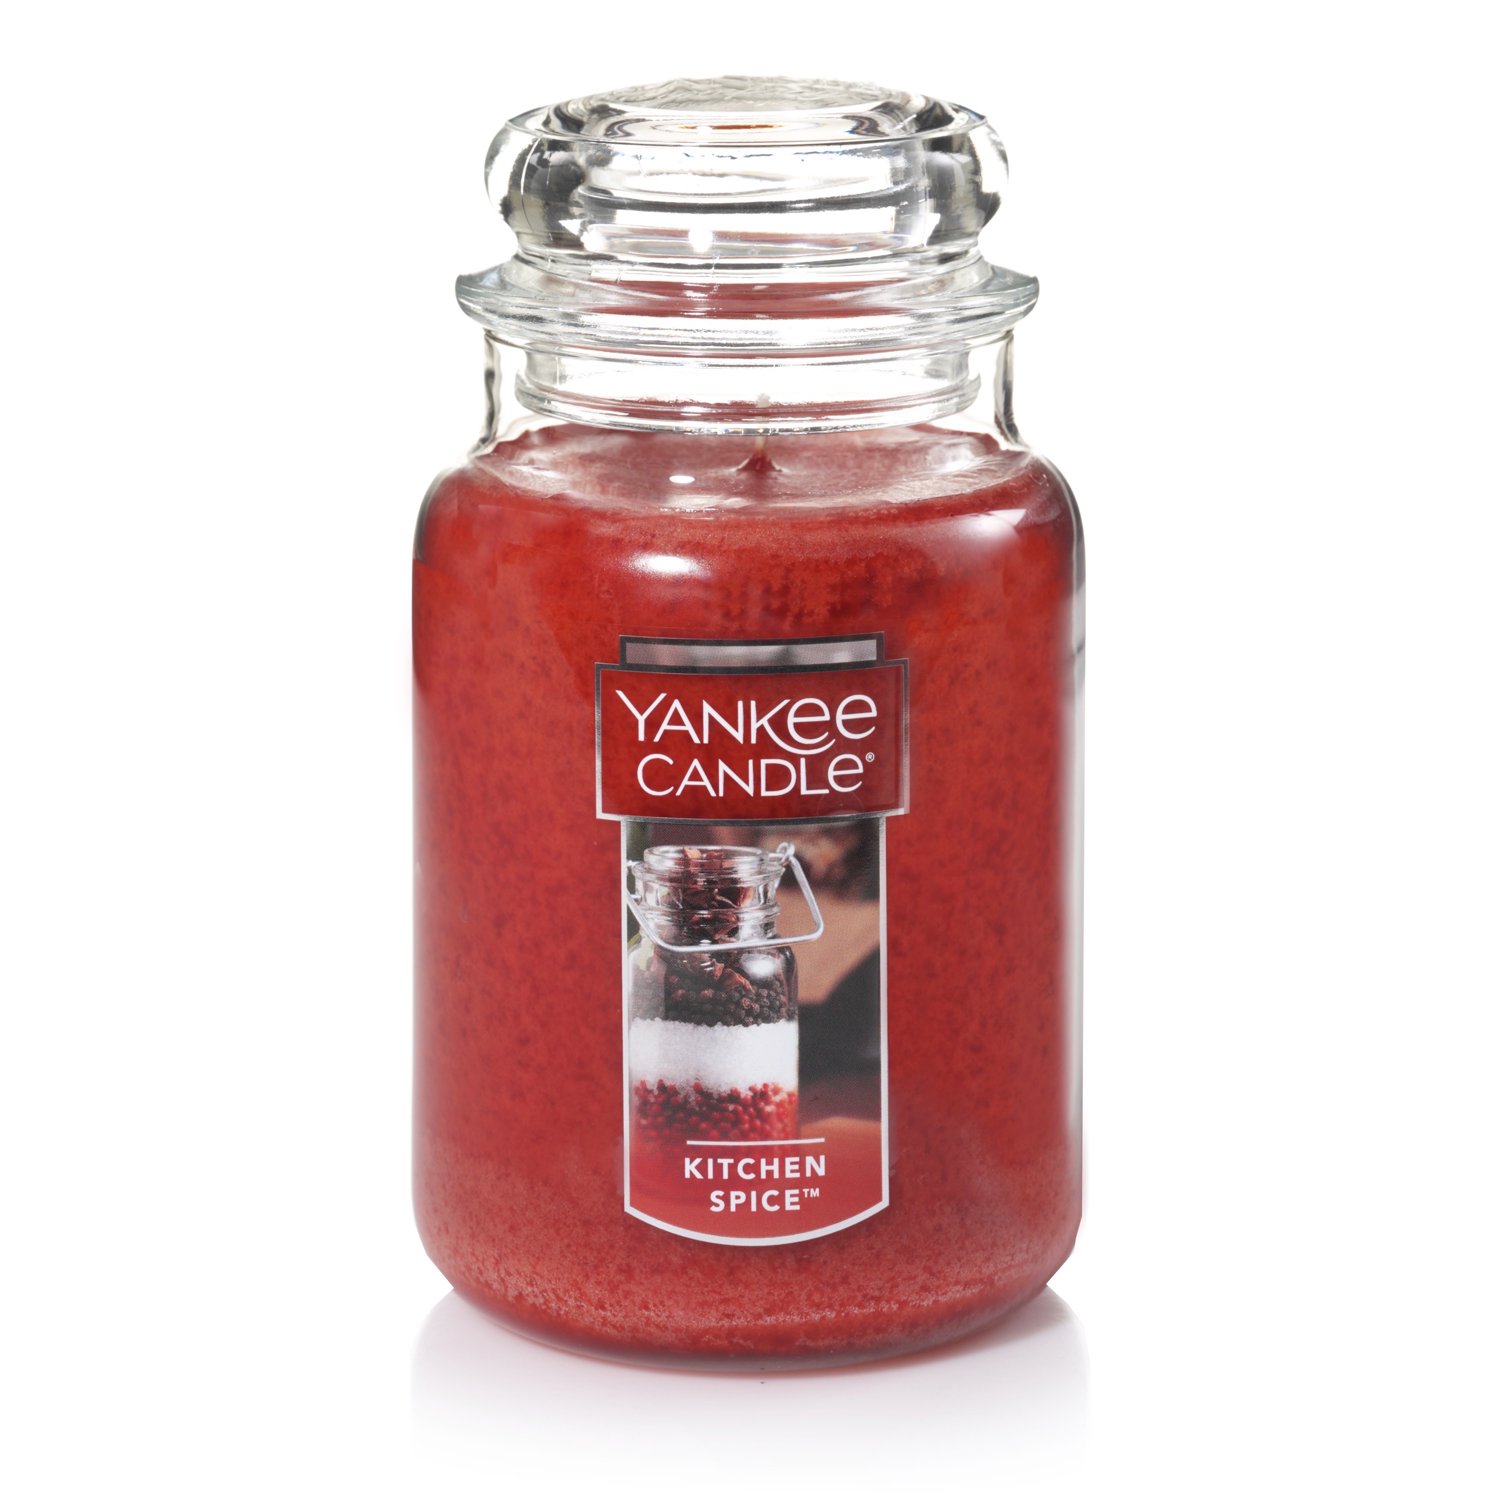 Yankee Candle Kitchen Spice - 22 oz Original Large Jar Scented Candle - image 1 of 5